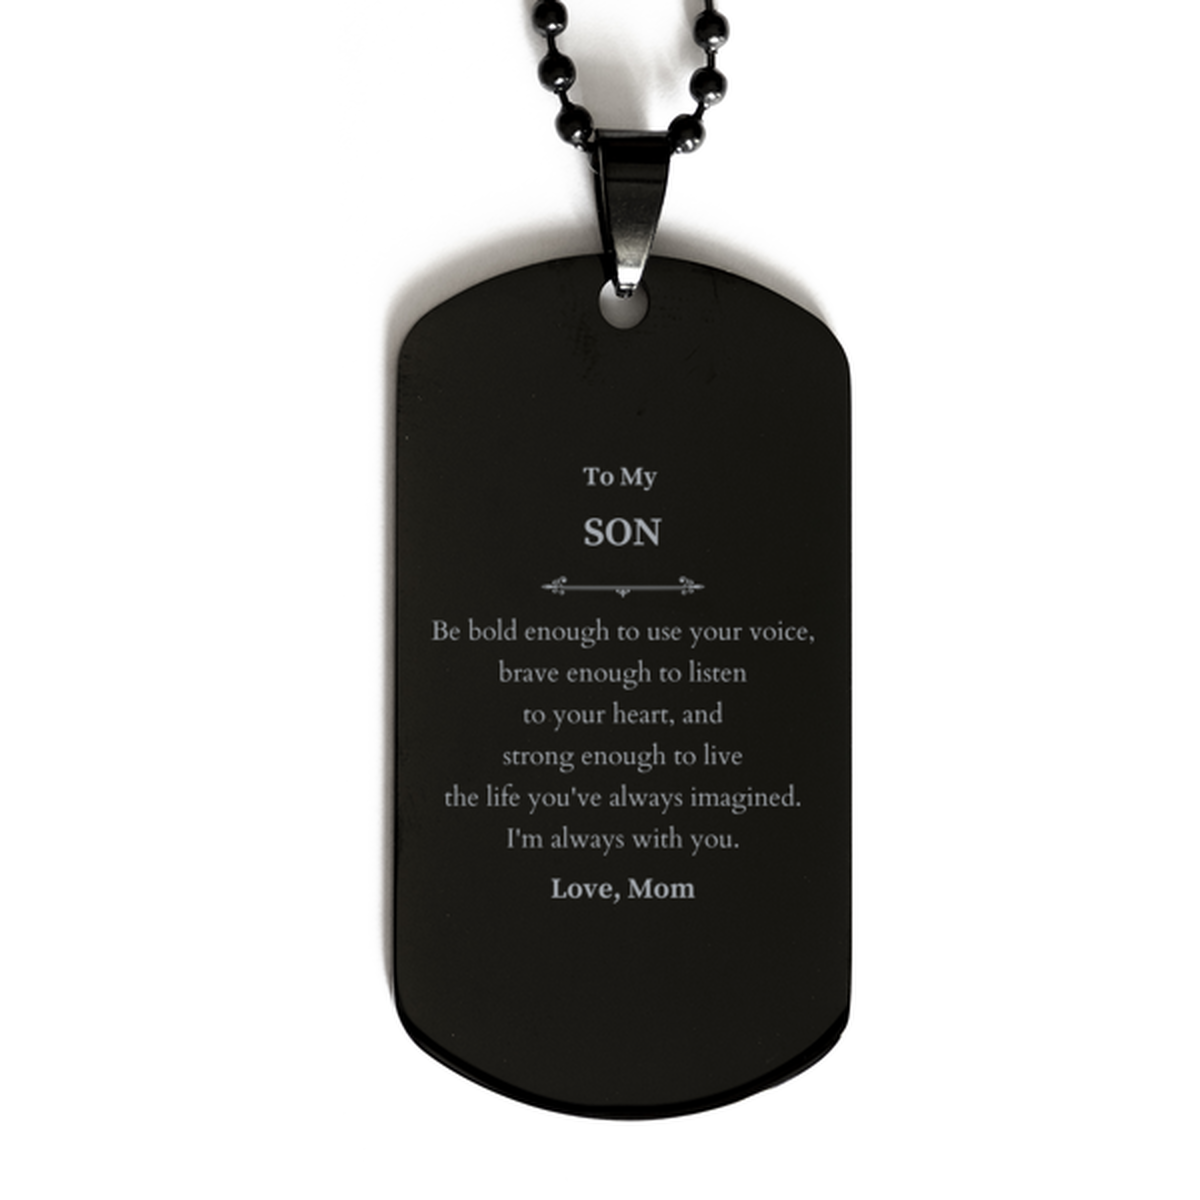 Keepsake Son Black Dog Tag Gift Idea Graduation Christmas Birthday Son from Mom, Son Be bold enough to use your voice, brave enough to listen to your heart. Love, Mom